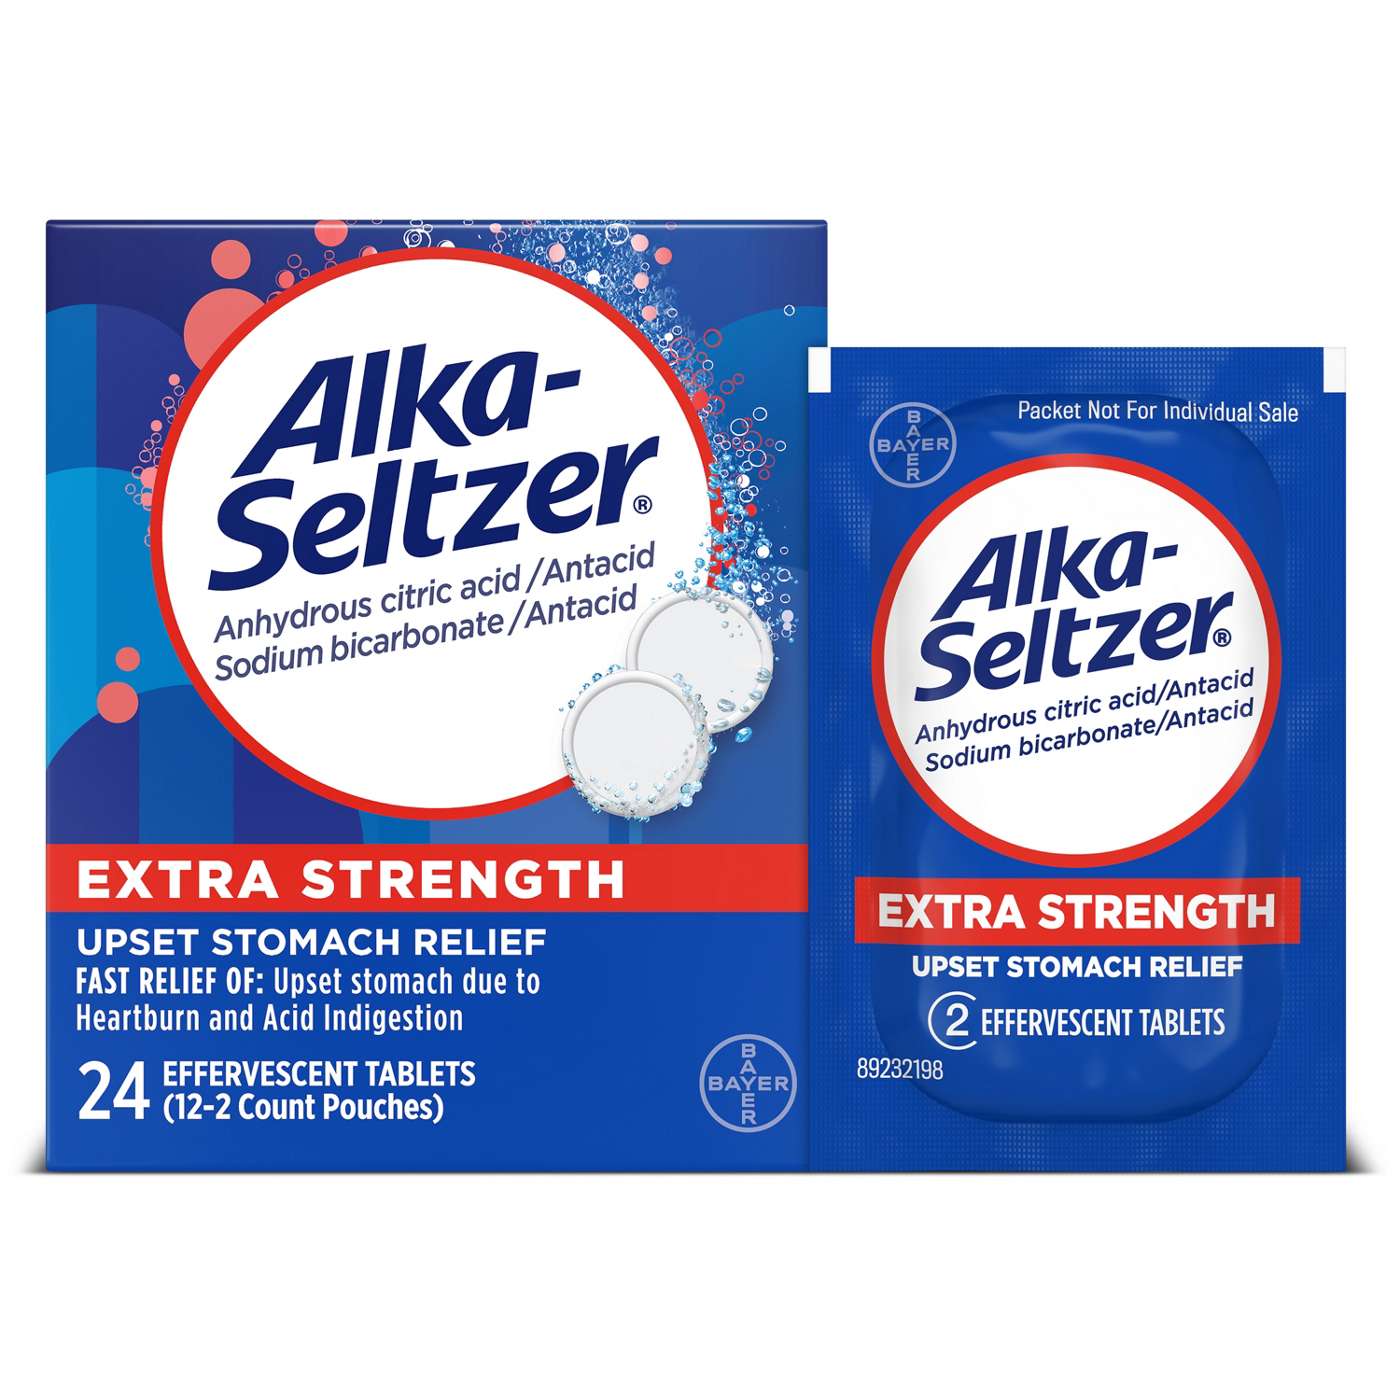 Alka-Seltzer Extra Strength Tablets; image 6 of 10